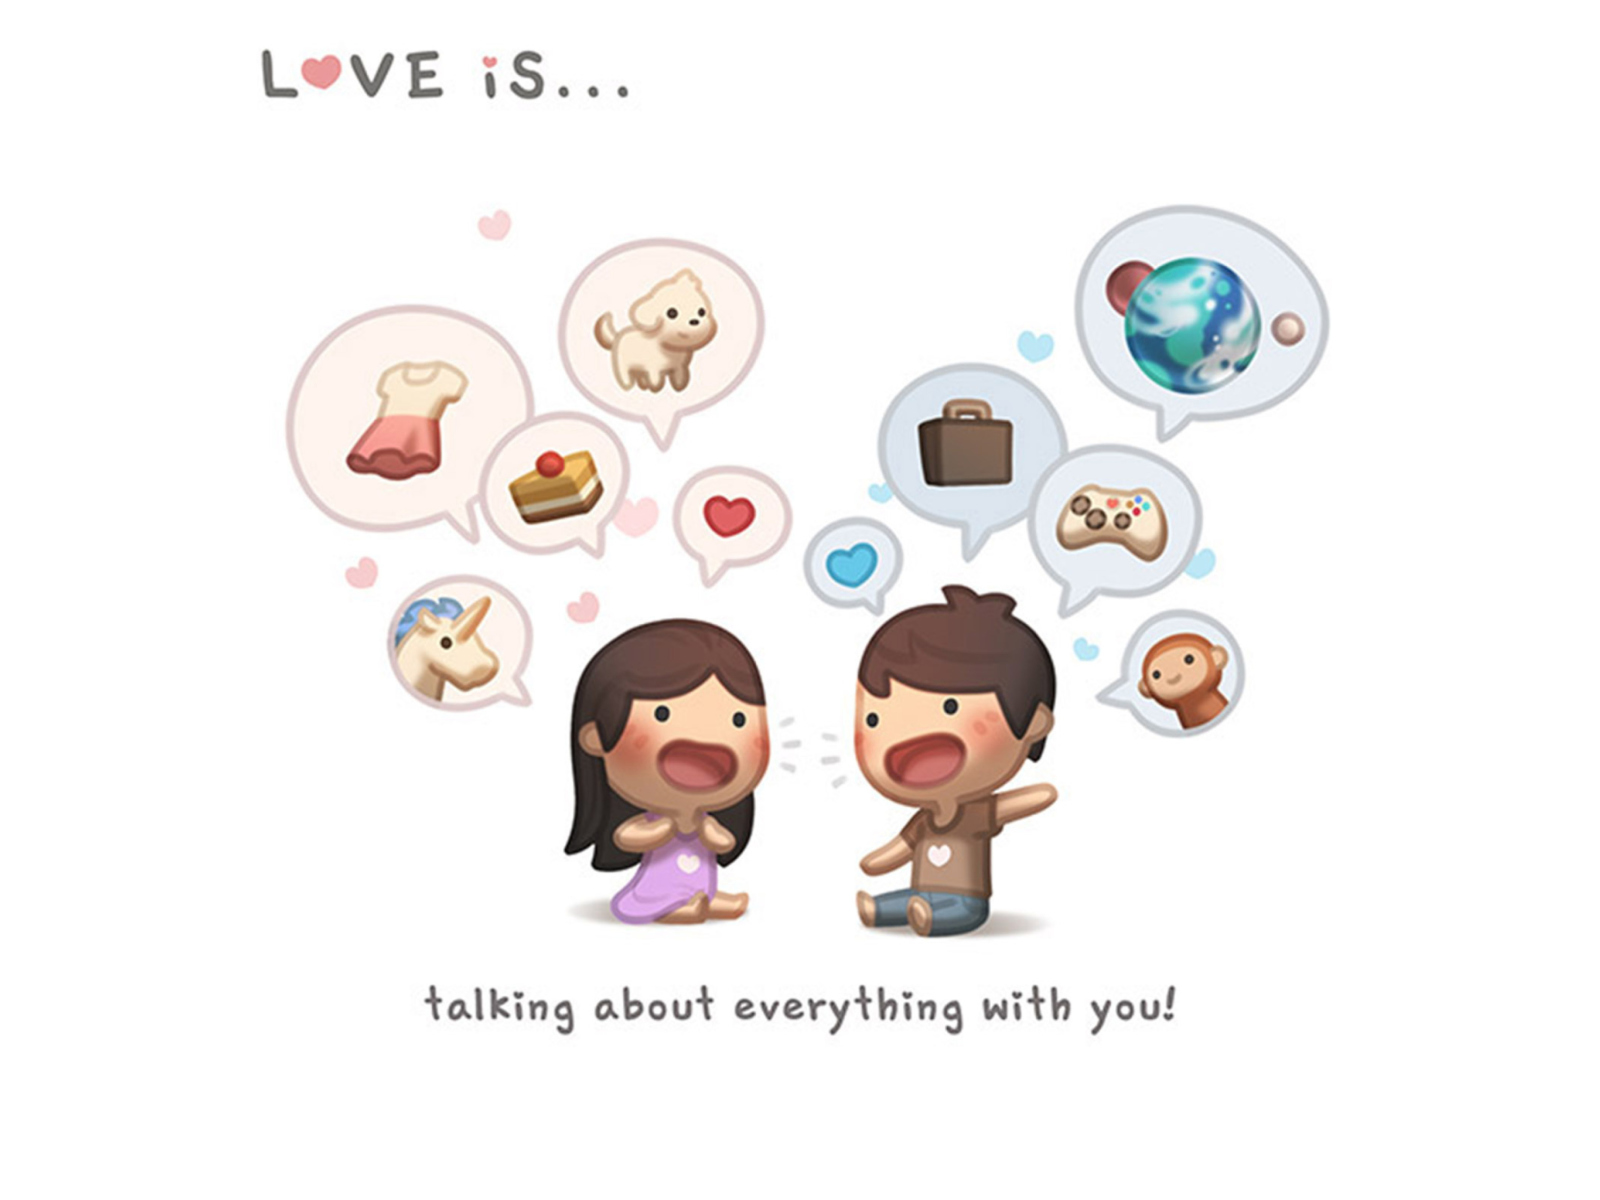 Love Is - Talking About Everything With You screenshot #1 1600x1200